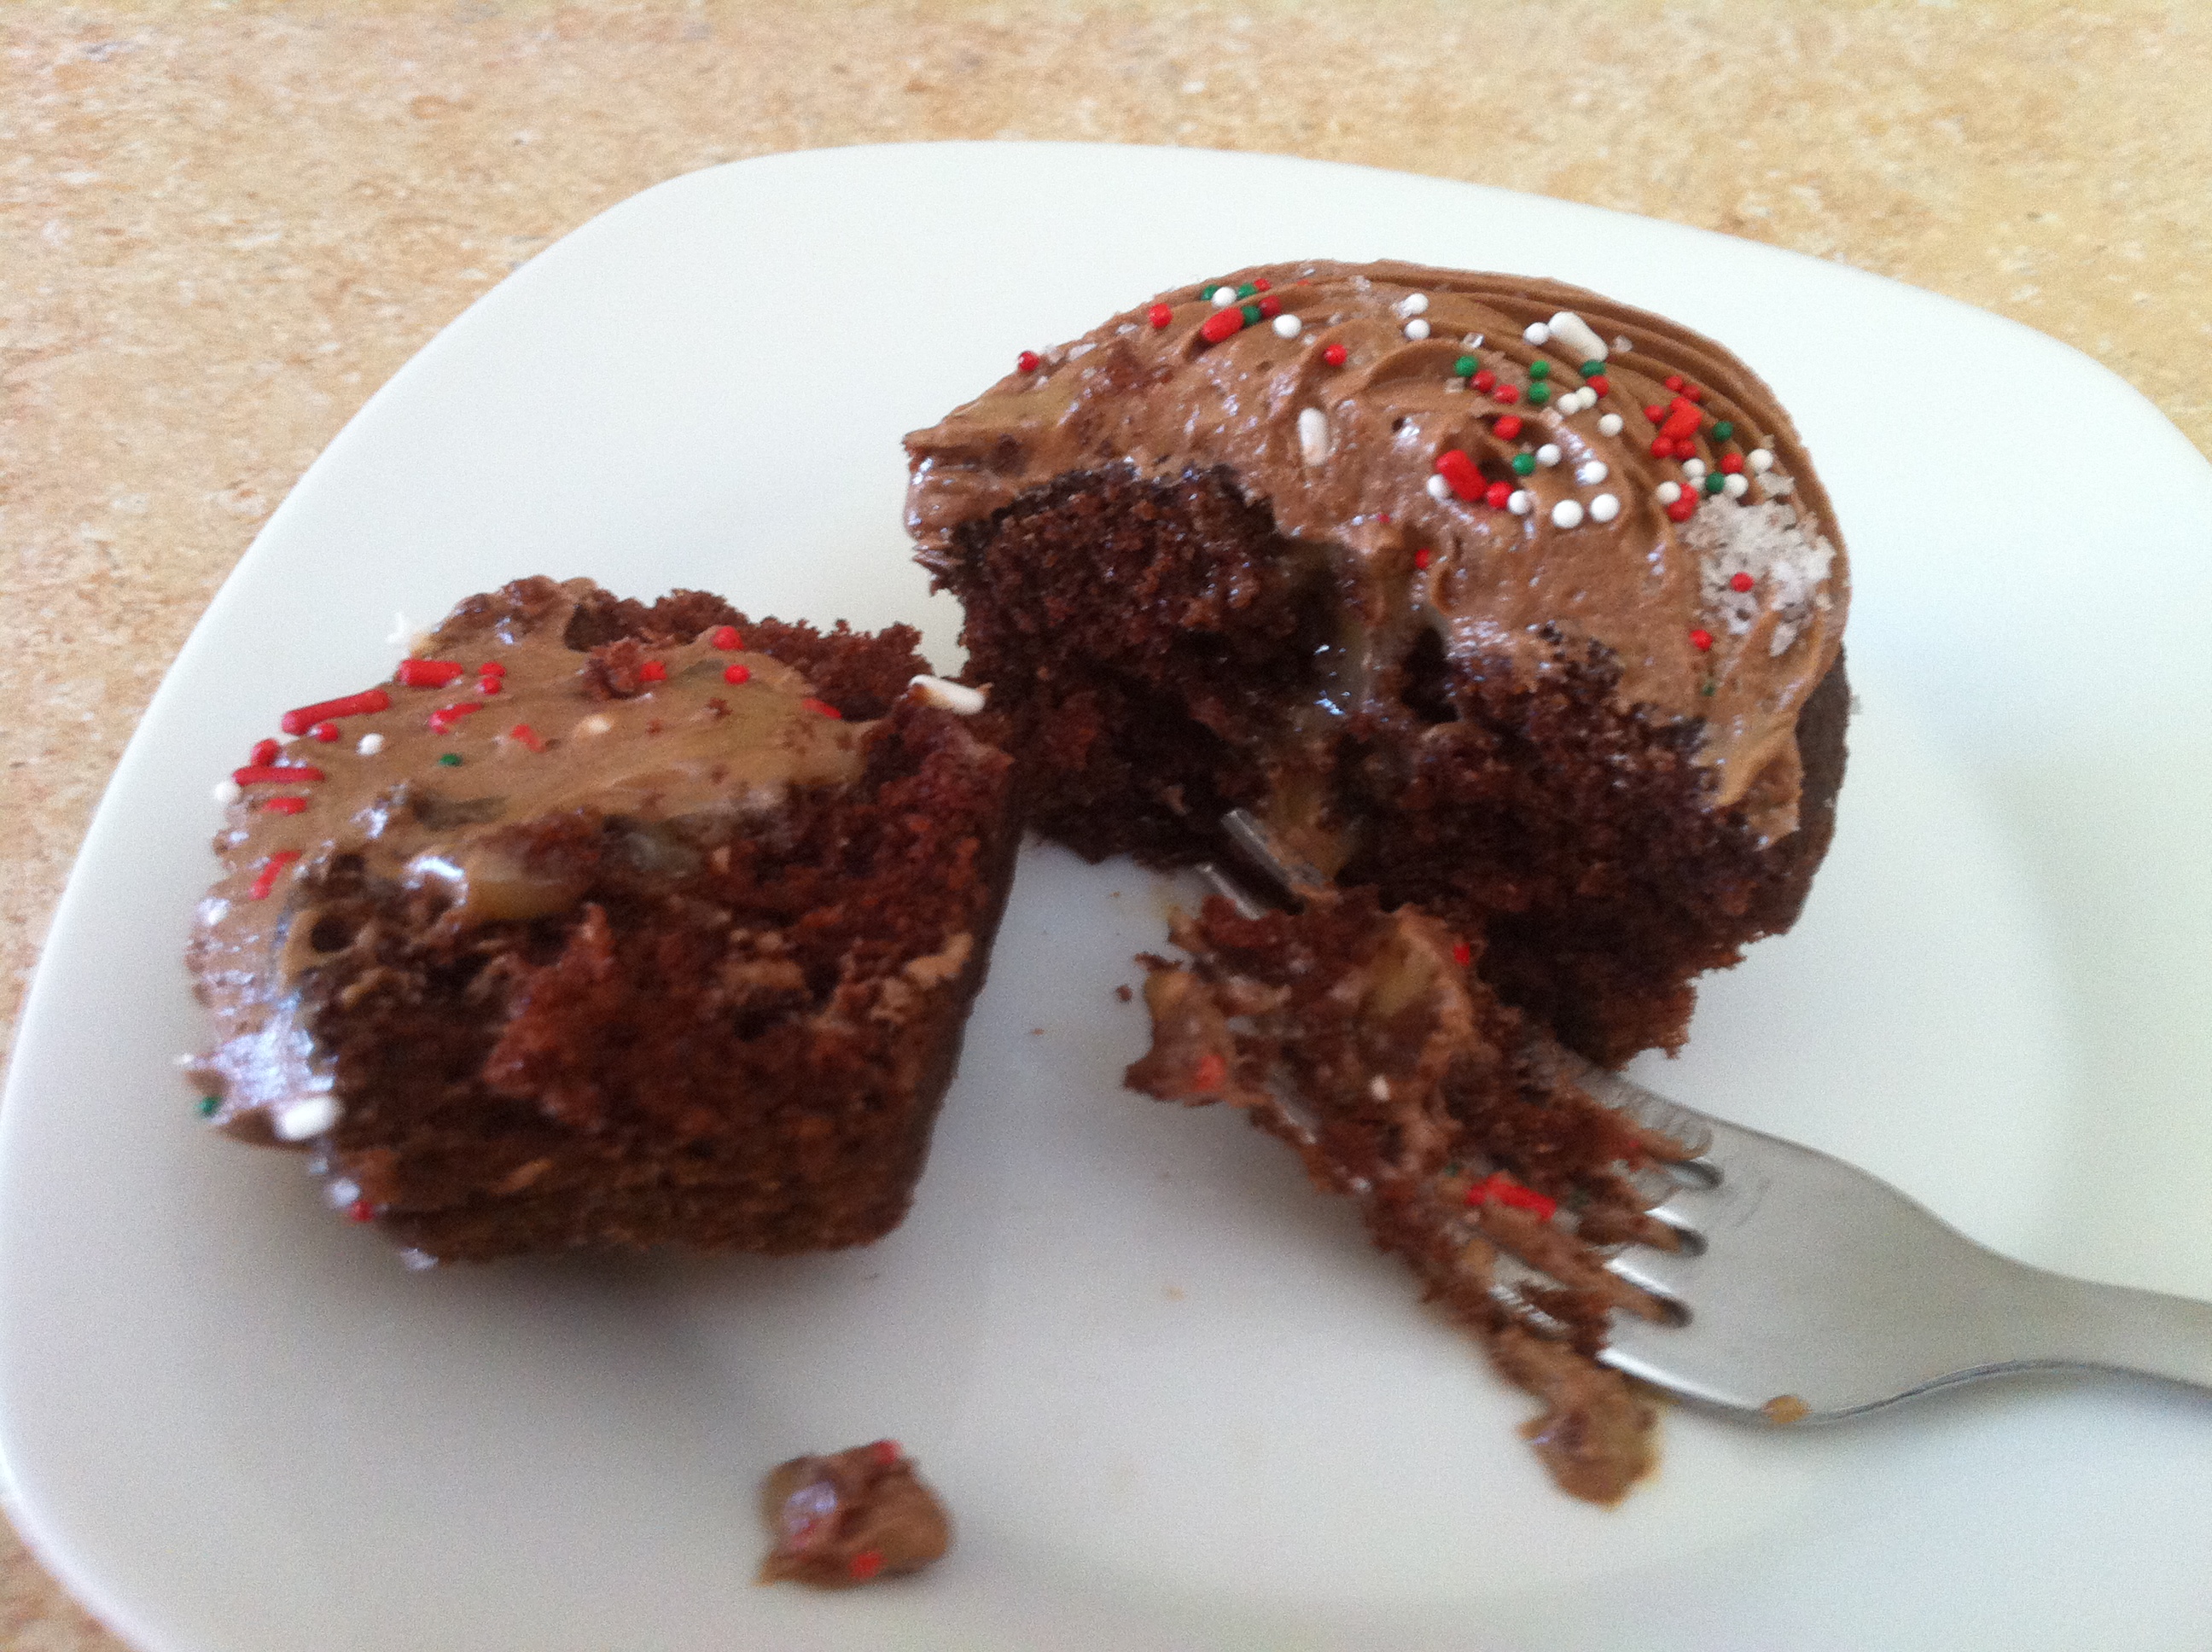 Chocolate & caramel cupcakes with sprinkles and a hint of sea salt